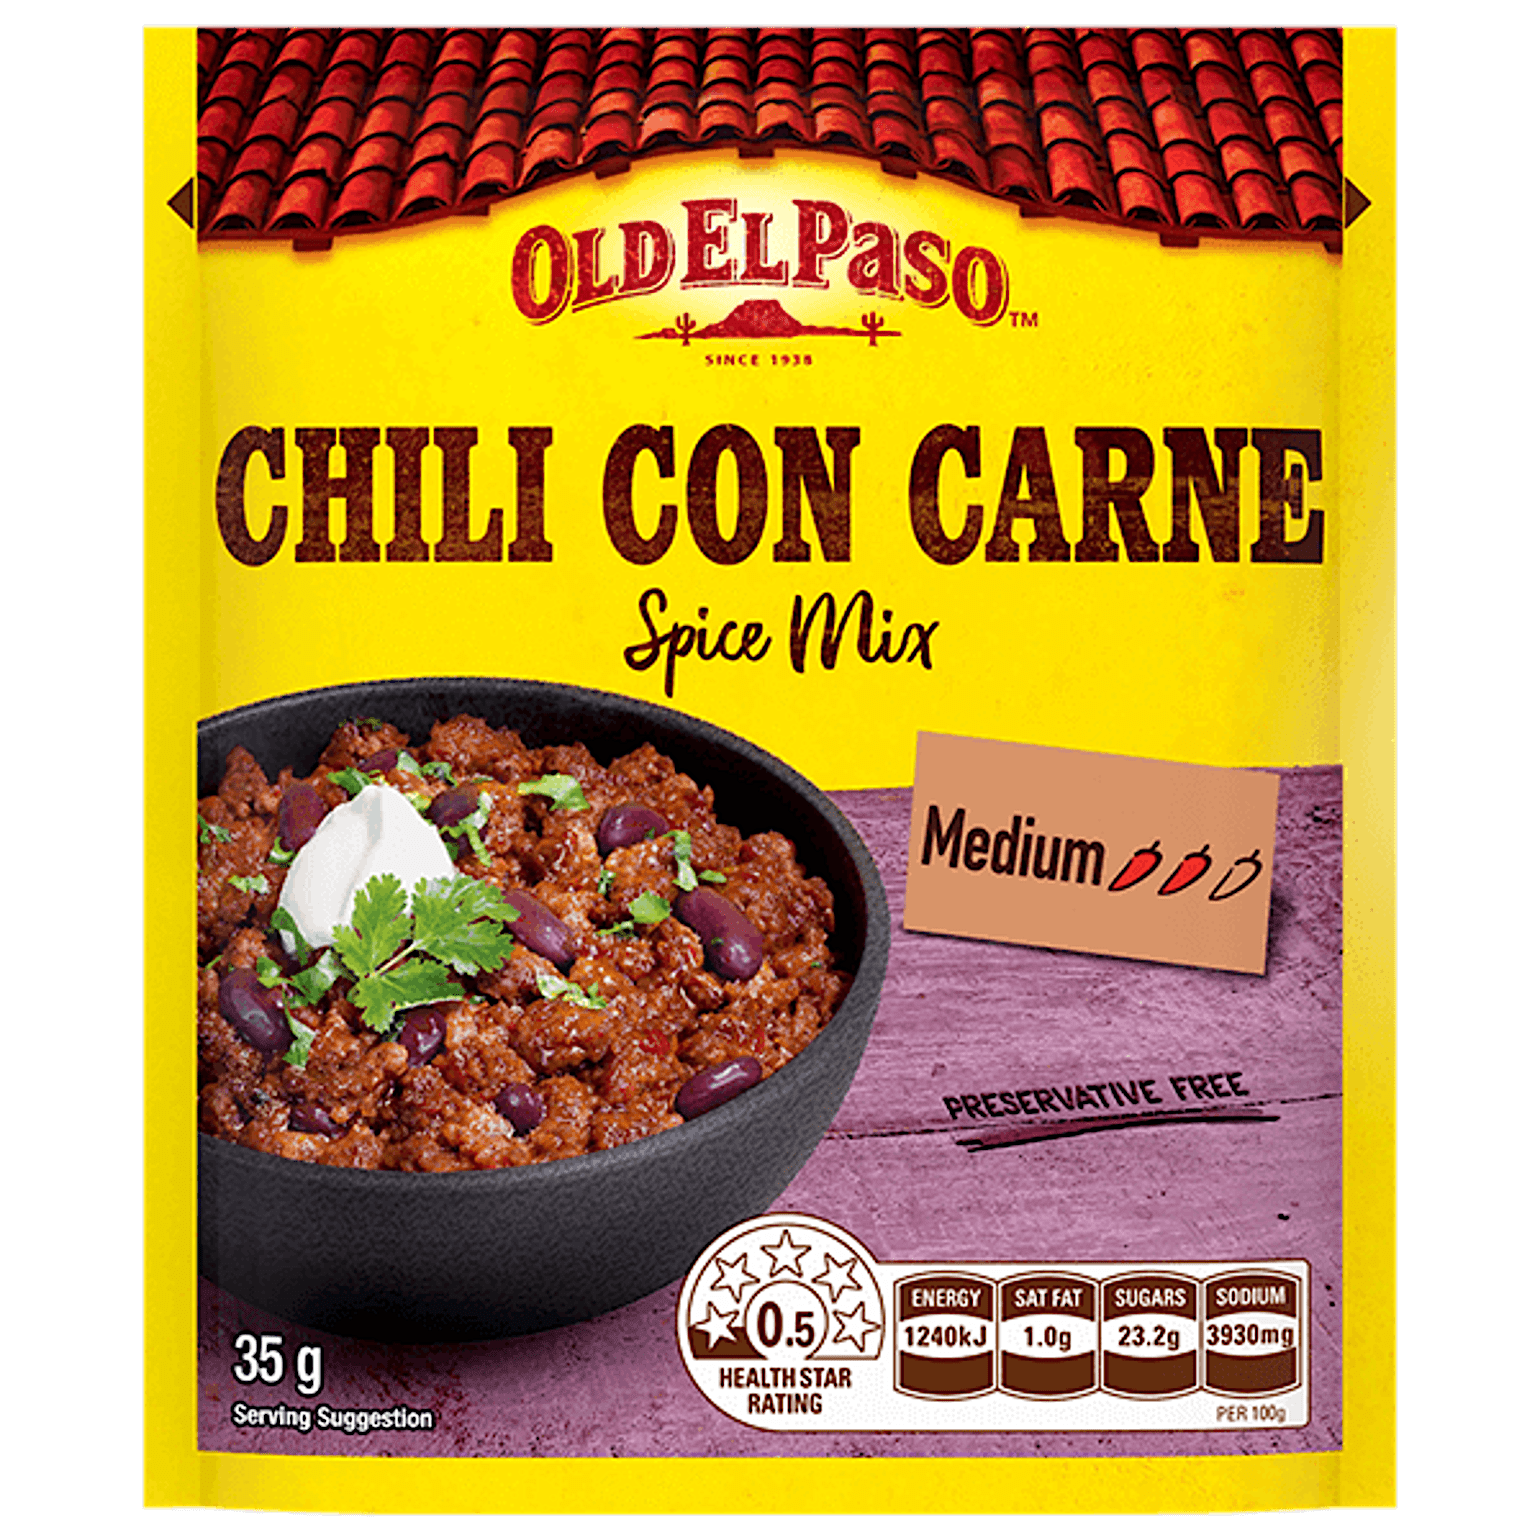 a pack of Old El Paso's chili con carne medium spice mix (35g)